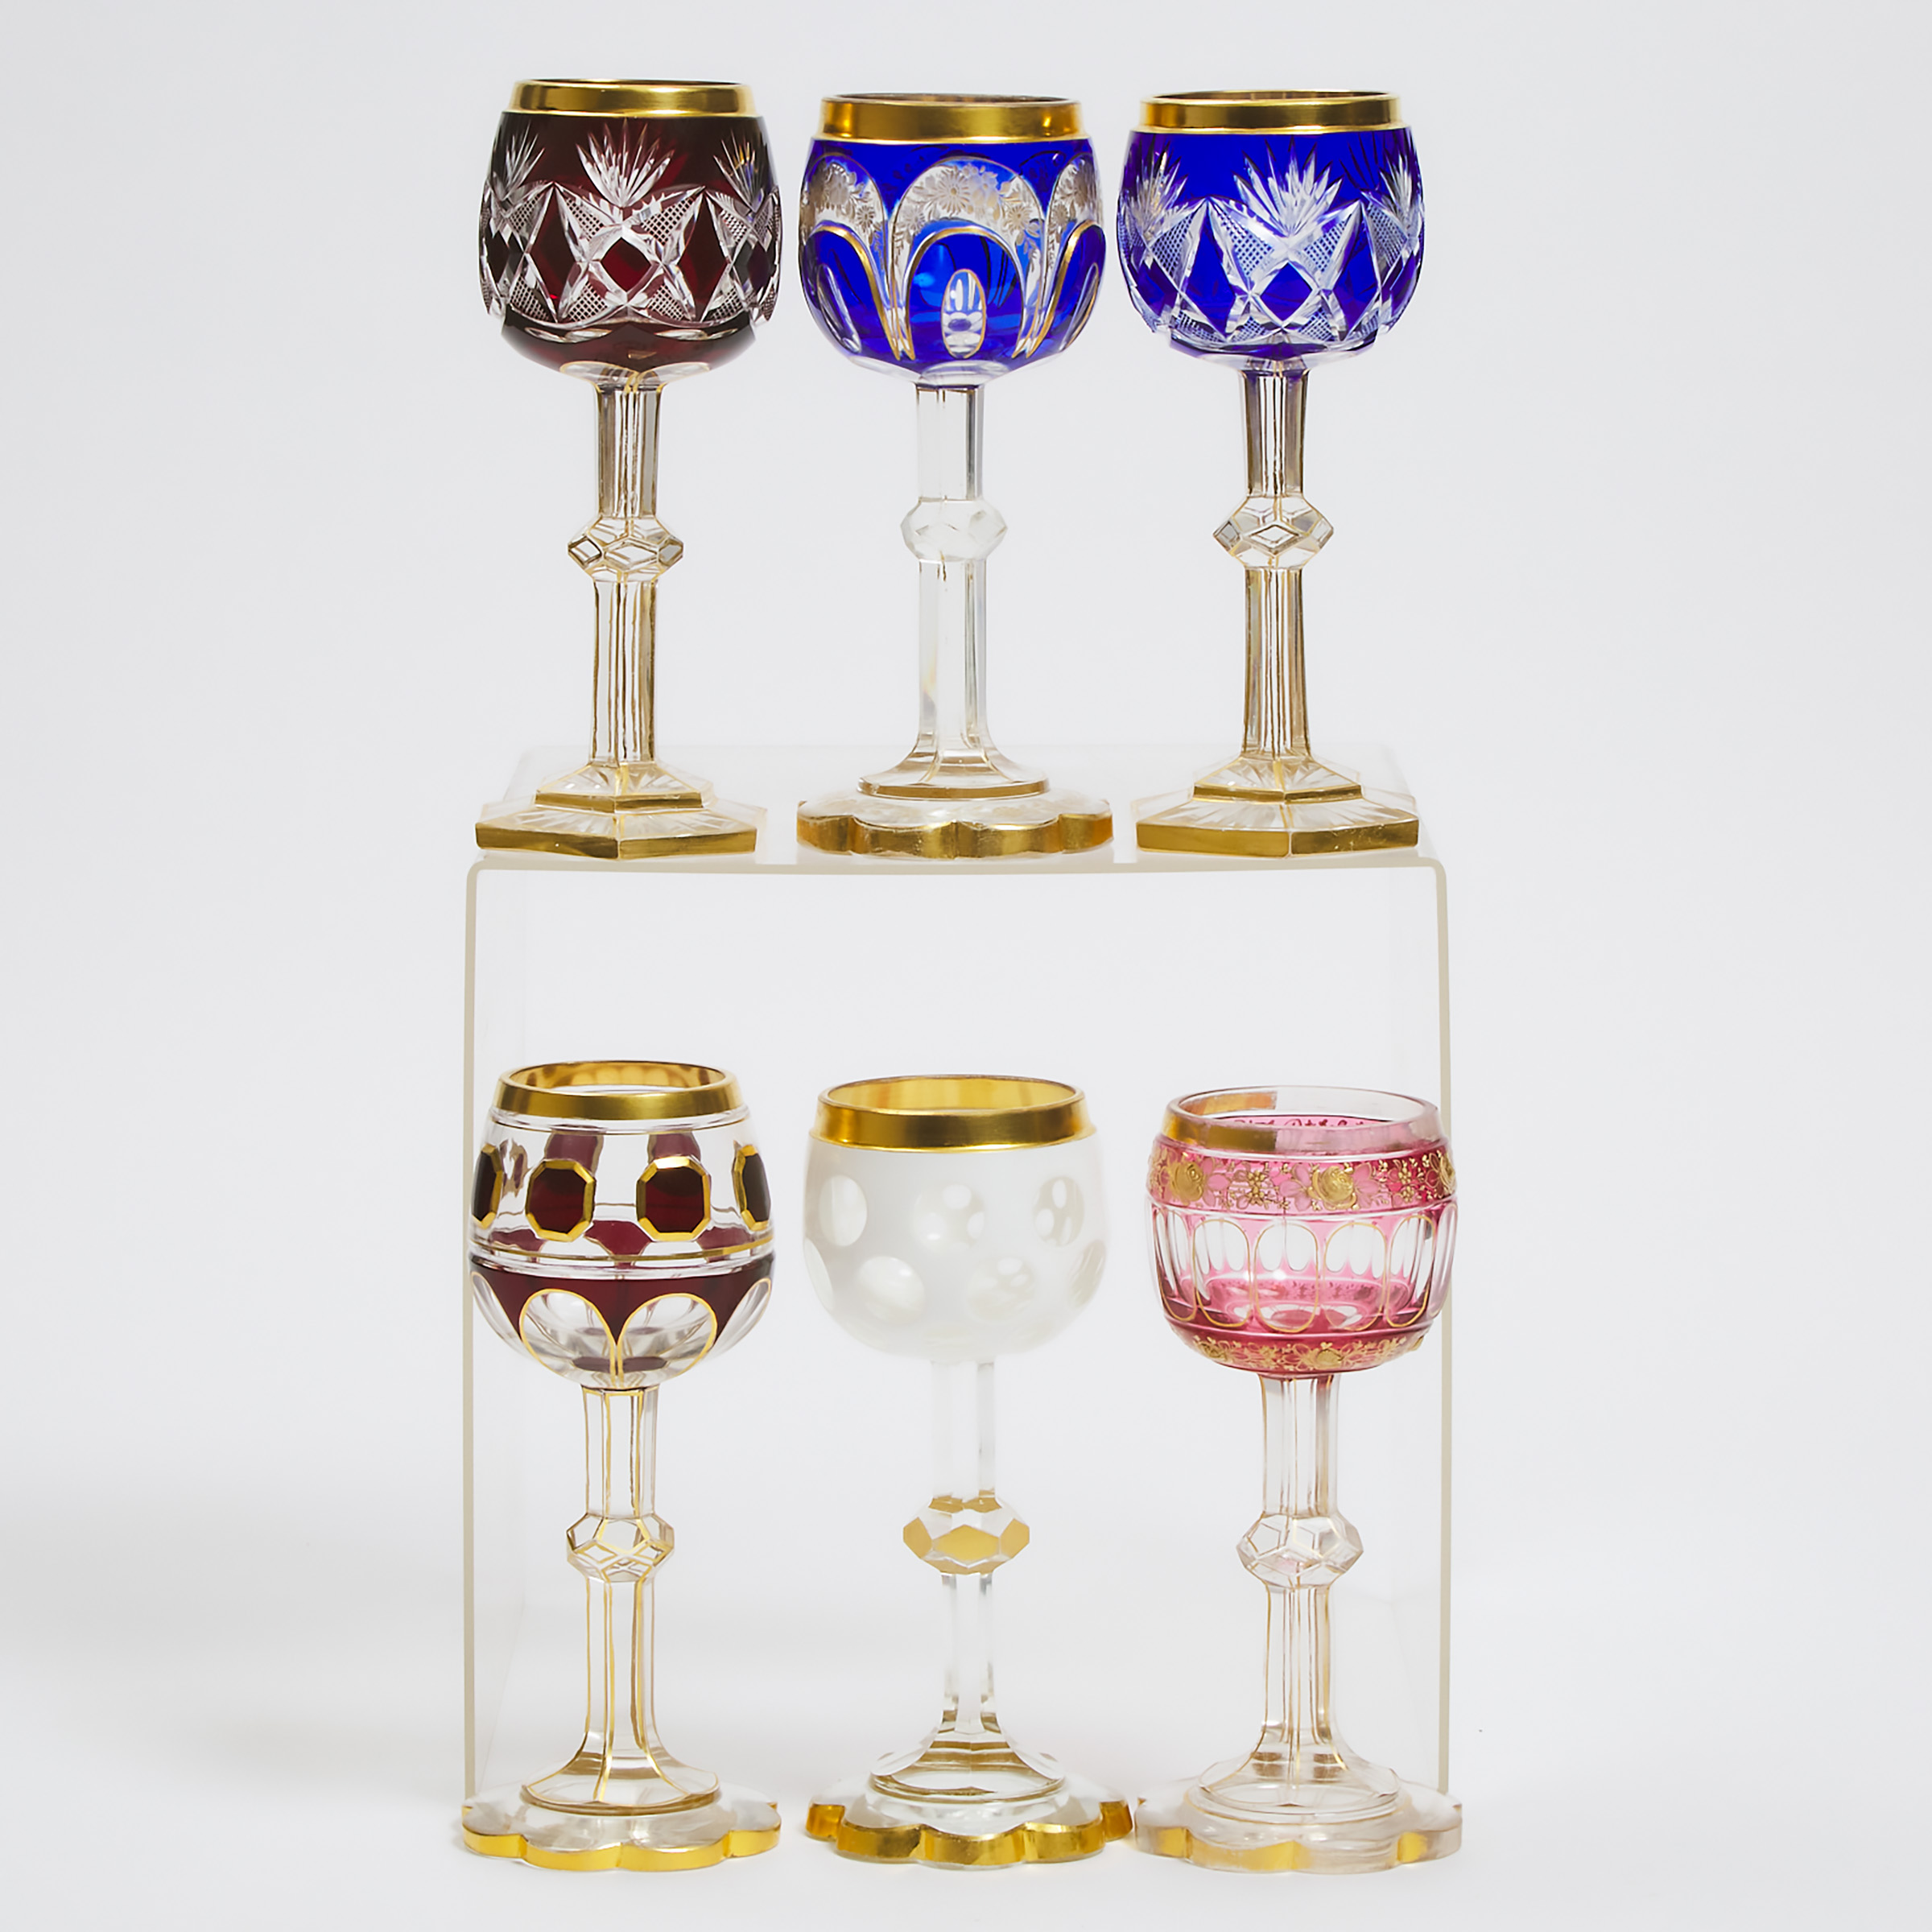 Six Bohemian Overlaid, Cut and Gilt Glass Wine Goblets, late 19th/early 20th century